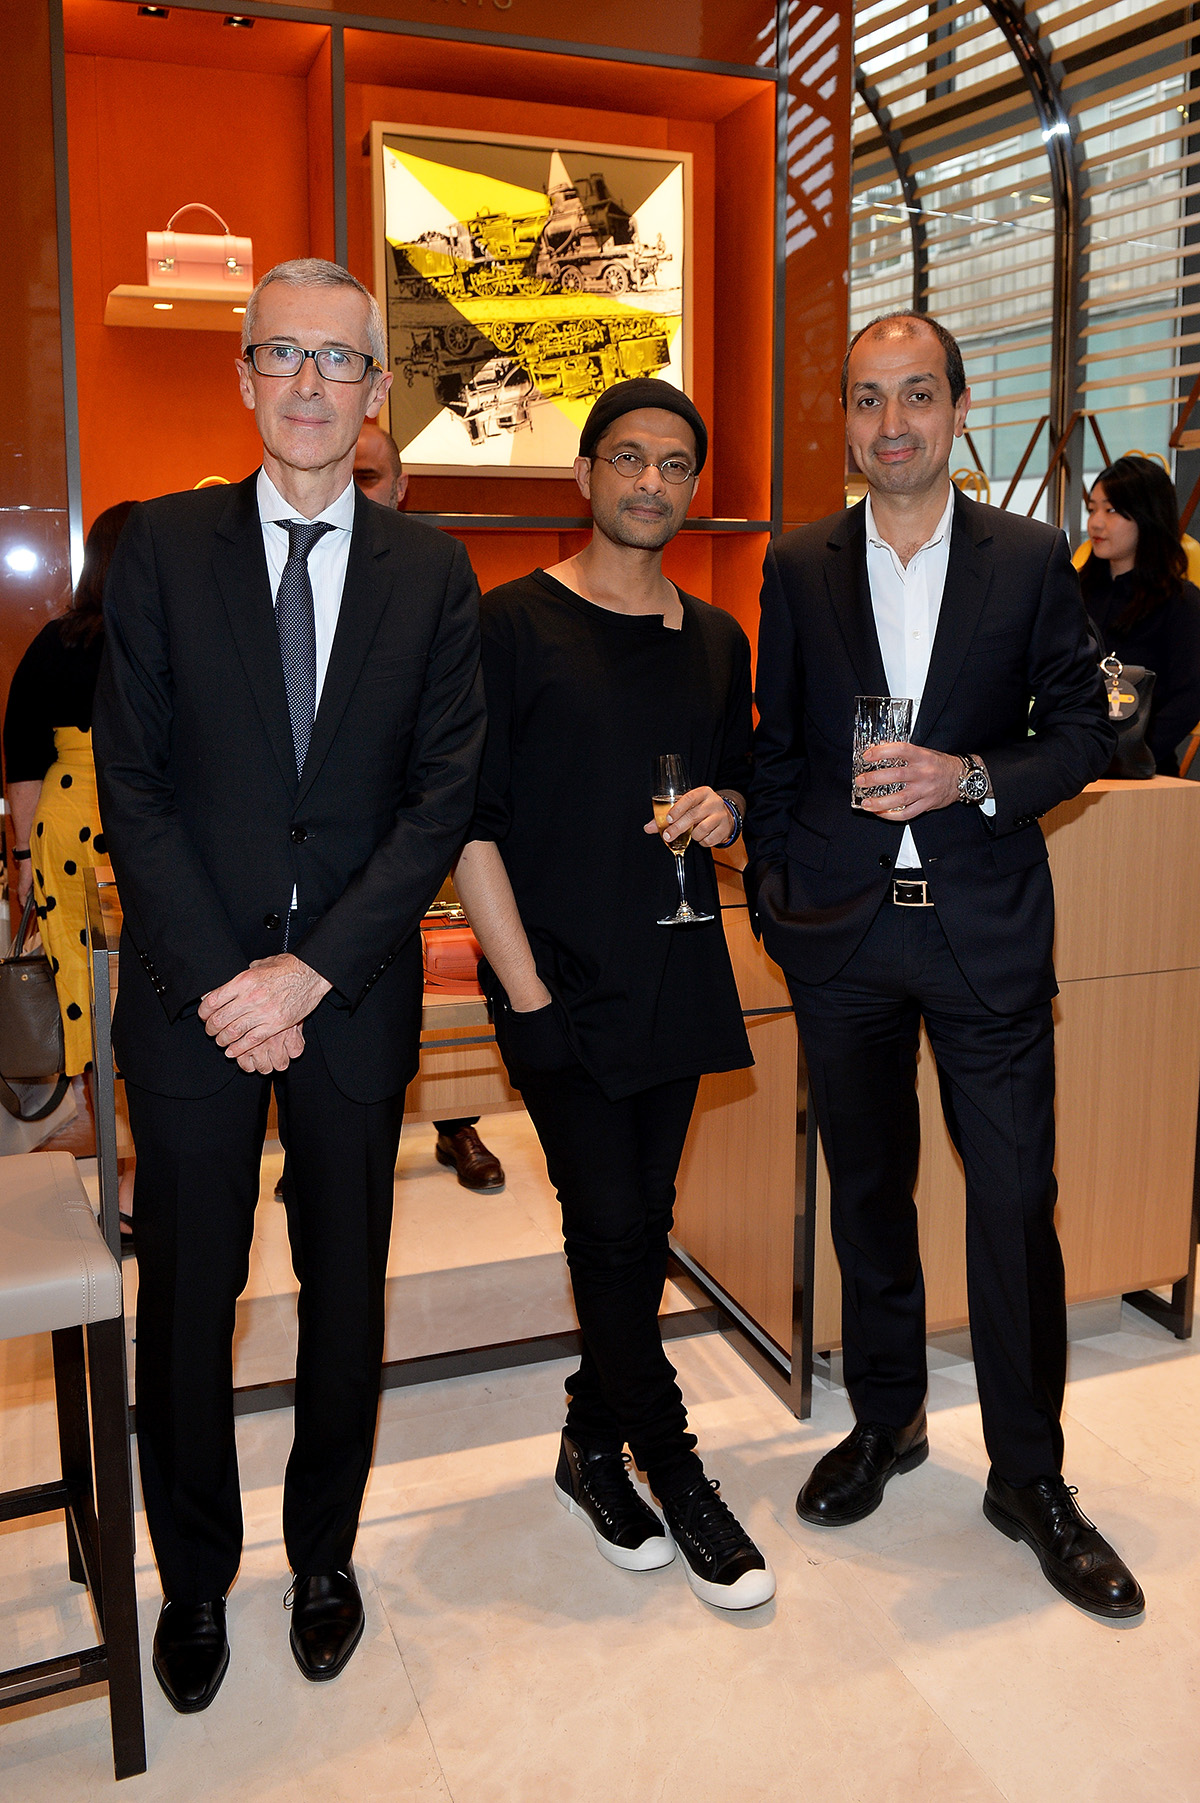 Moynat's CEO Guillaume Davin, Creative Director, Ramesh Nair and LUX Editor-in-Chief Darius Sanai holding flutes of champagne in Moynat shop